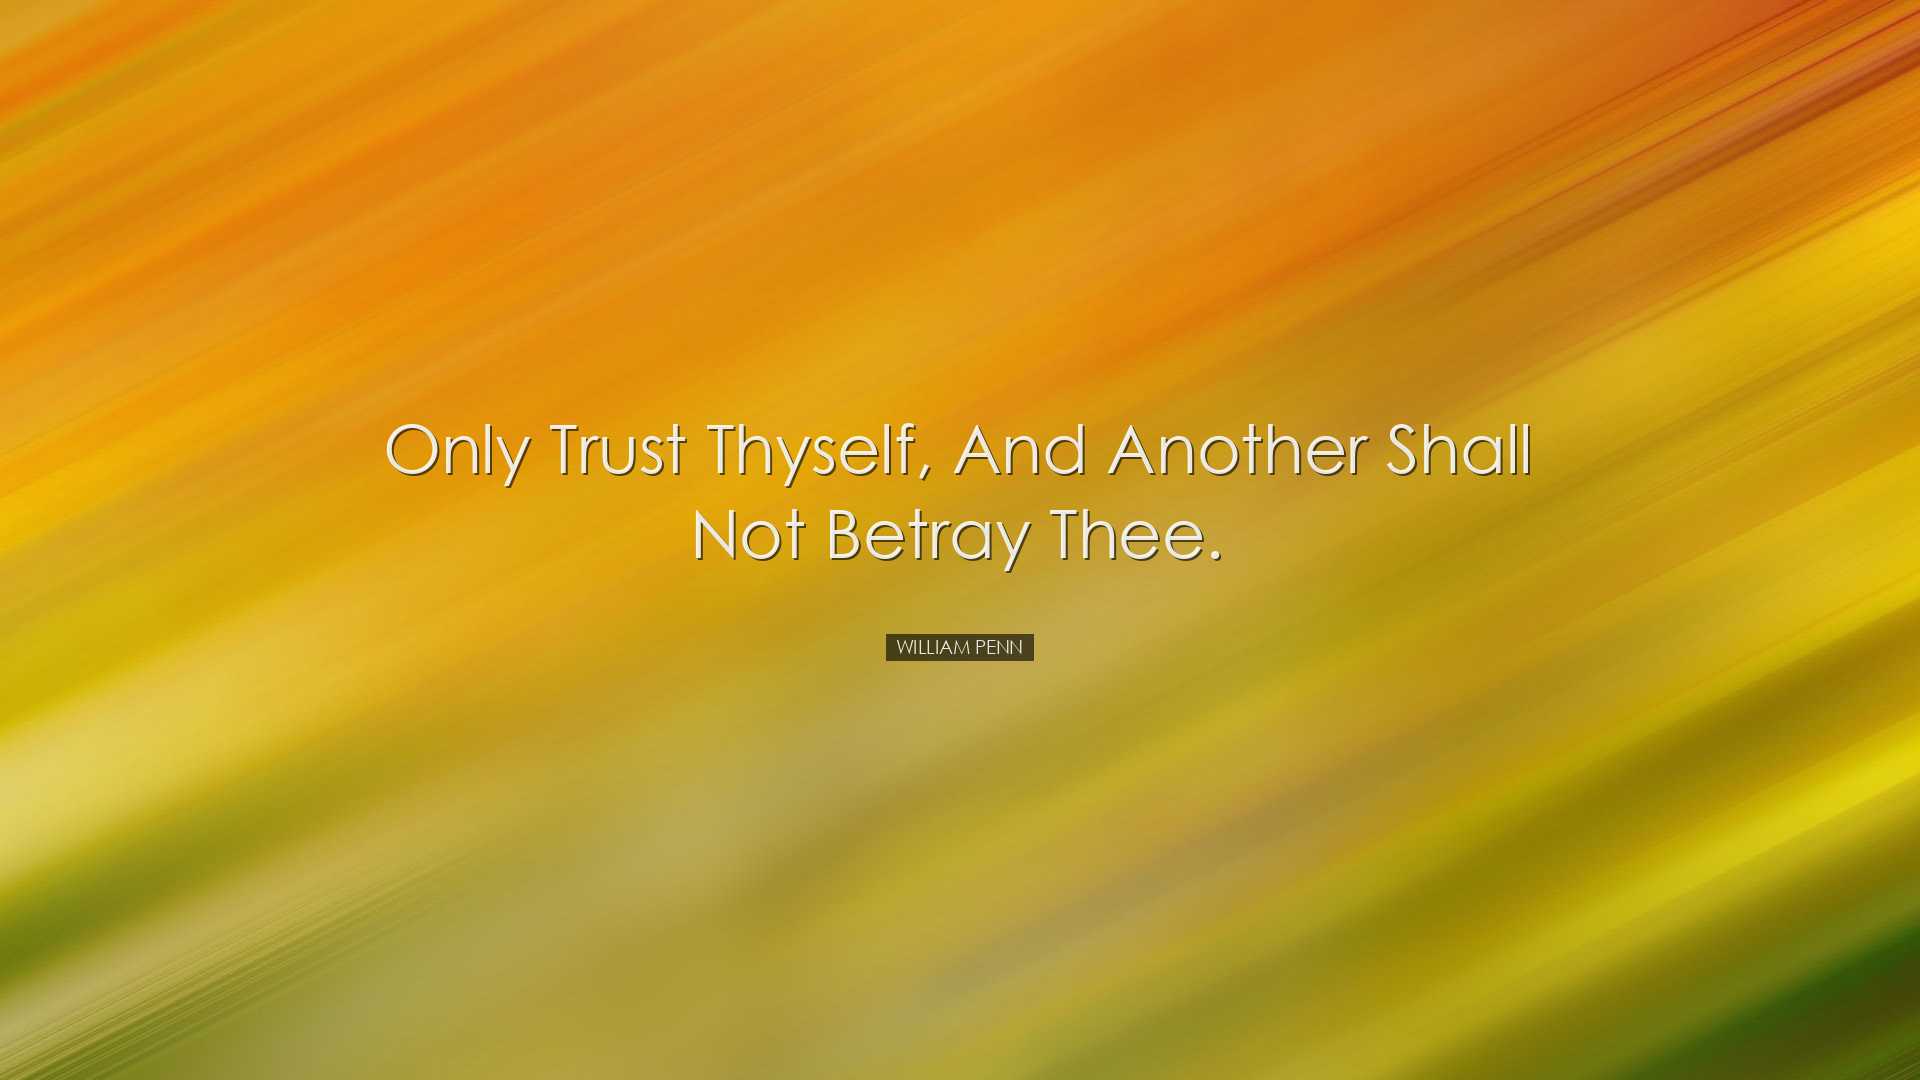 Only trust thyself, and another shall not betray thee. - William P